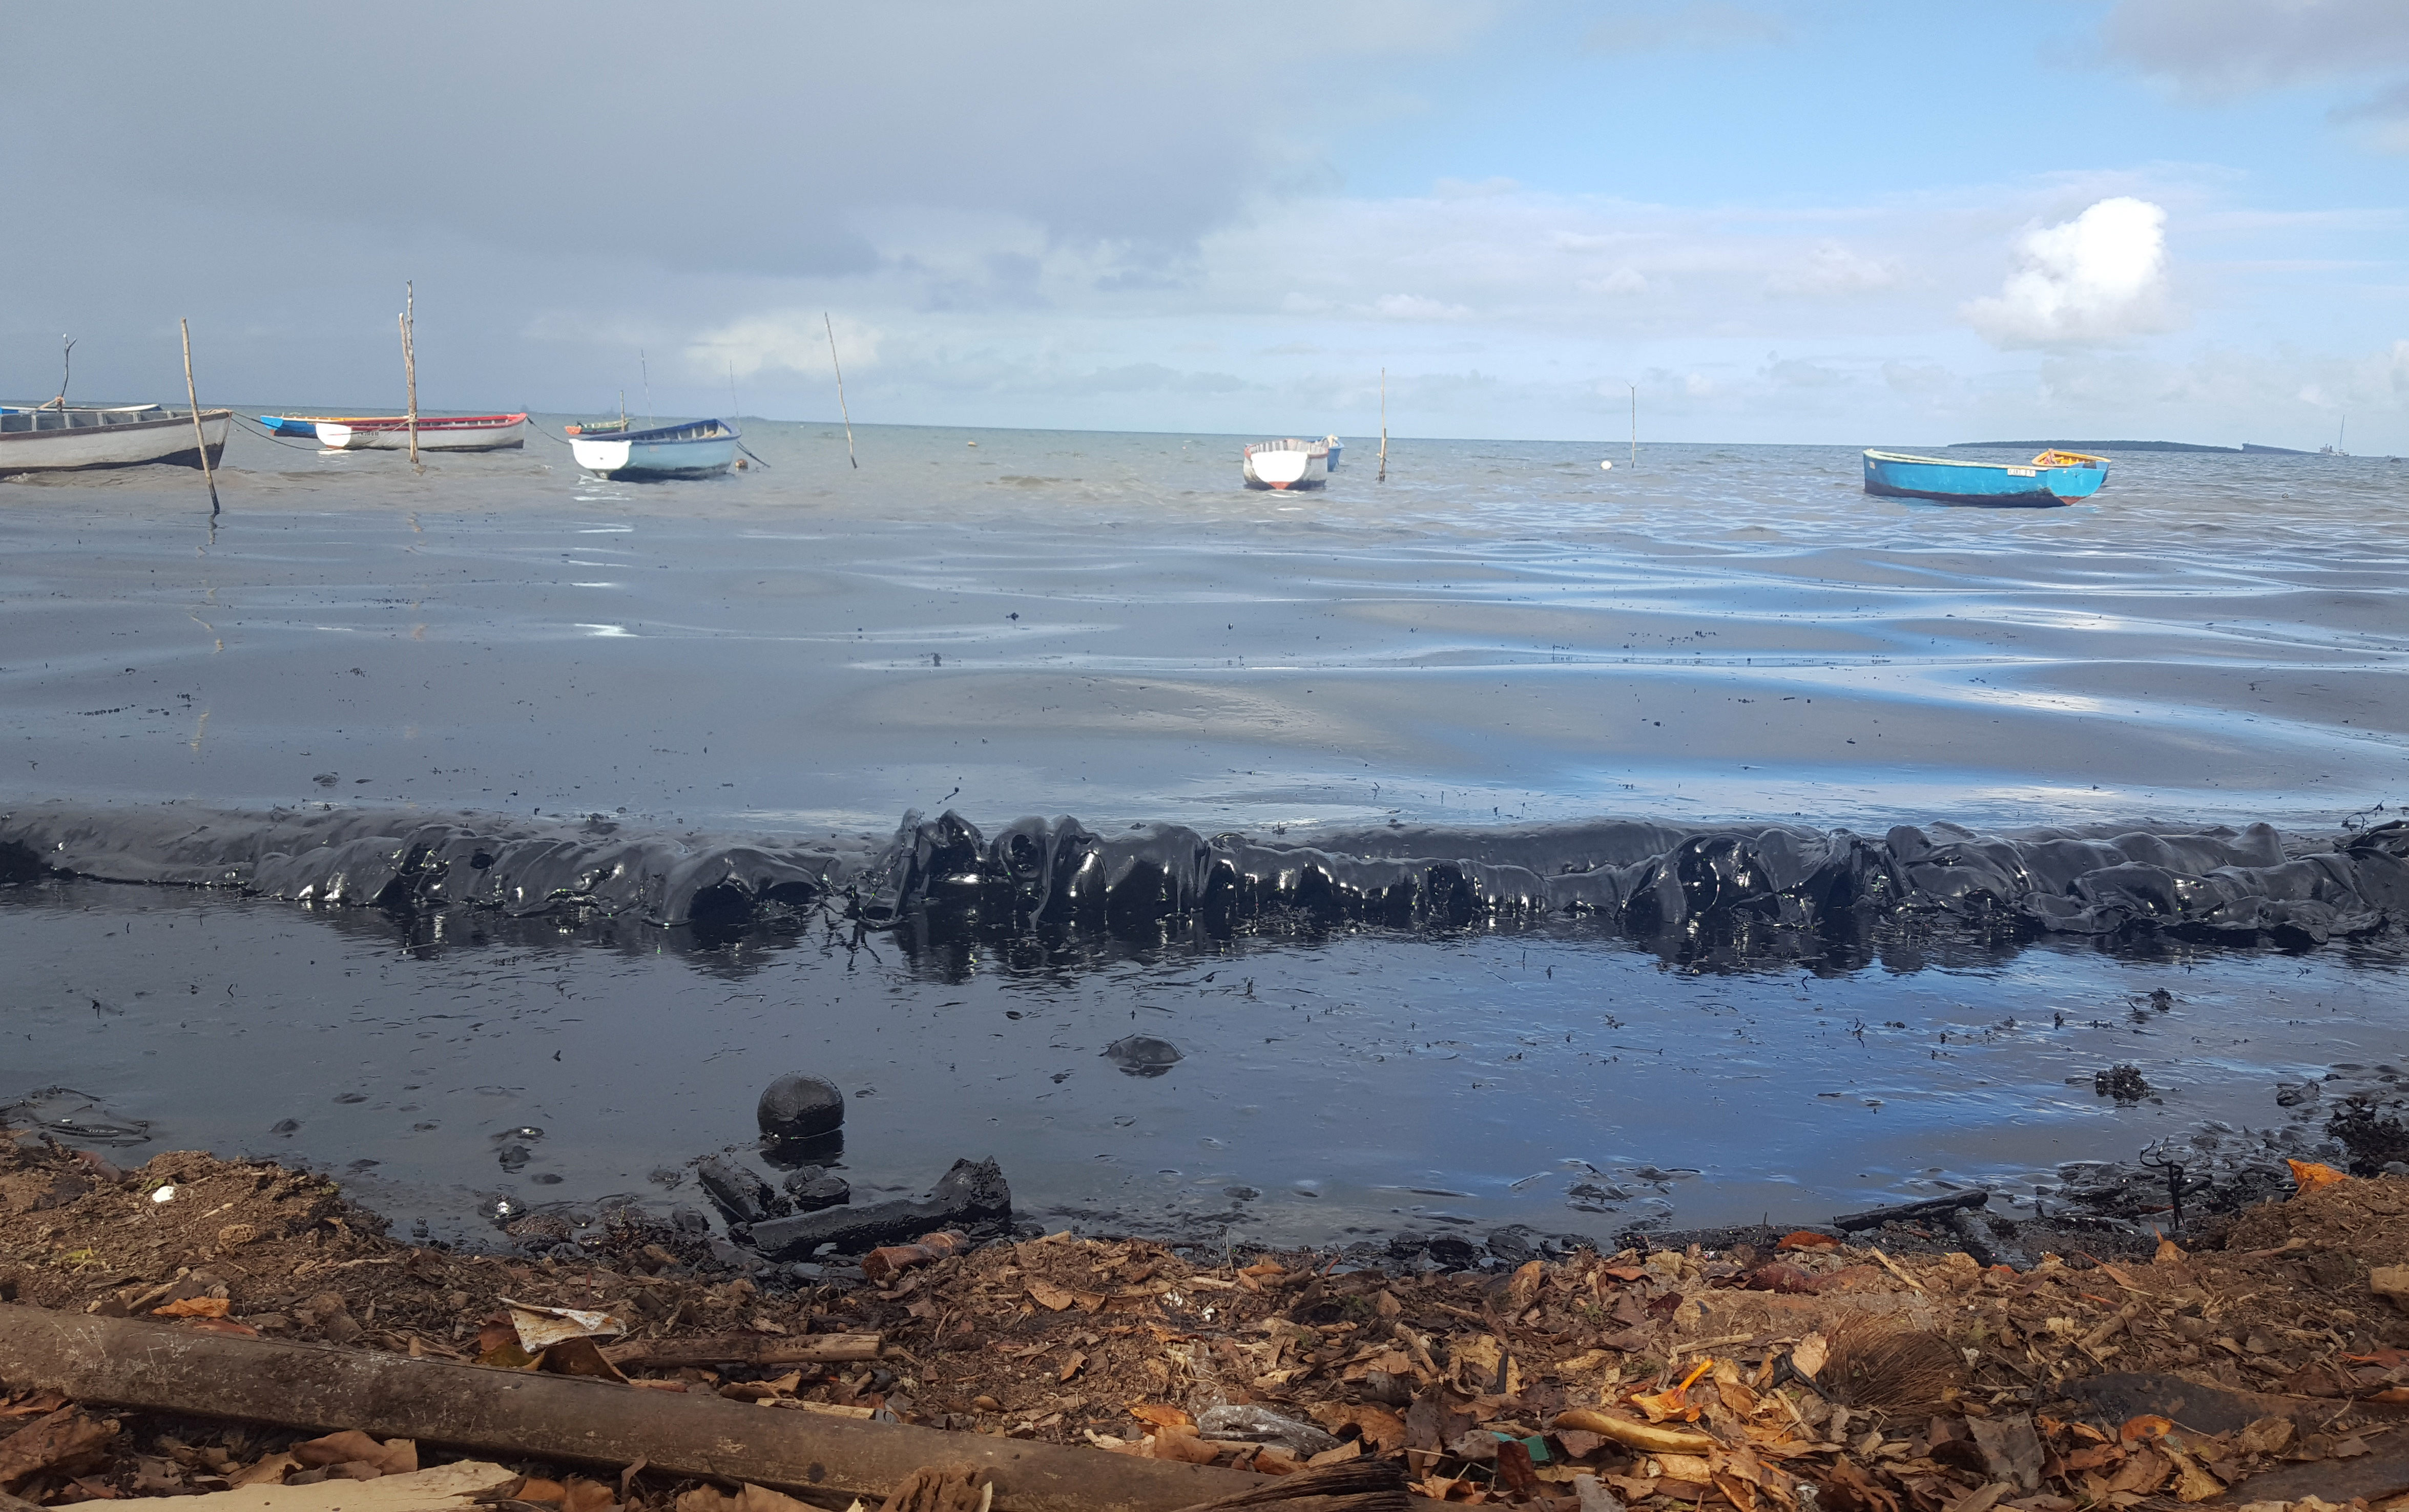 Oil polluting the foreshore of the public beach in Riviere des Creoles, Mauritius, on Aug. 8, 2020, after it leaked from the MV Wakashio, a bulk carrier ship that recently ran aground off the southeast coast of Mauritius.